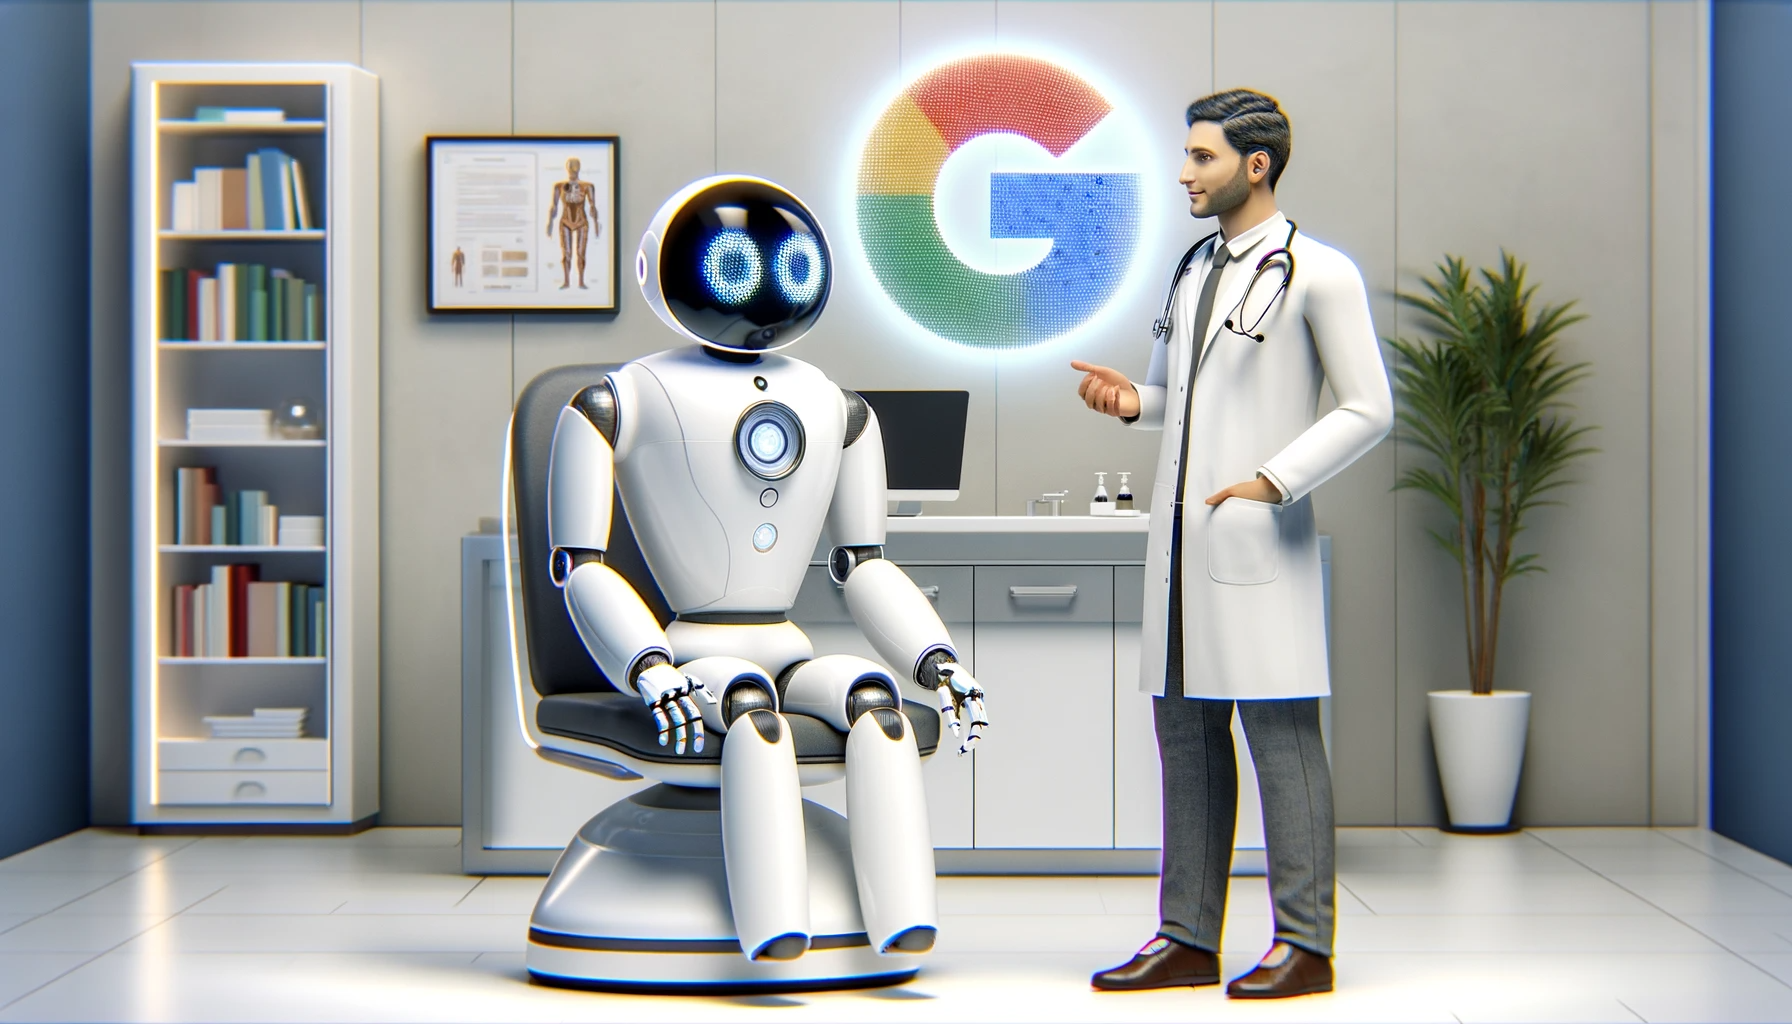 Google’s AI chatbot allegedly surpasses human doctors in text-based medical diagnoses